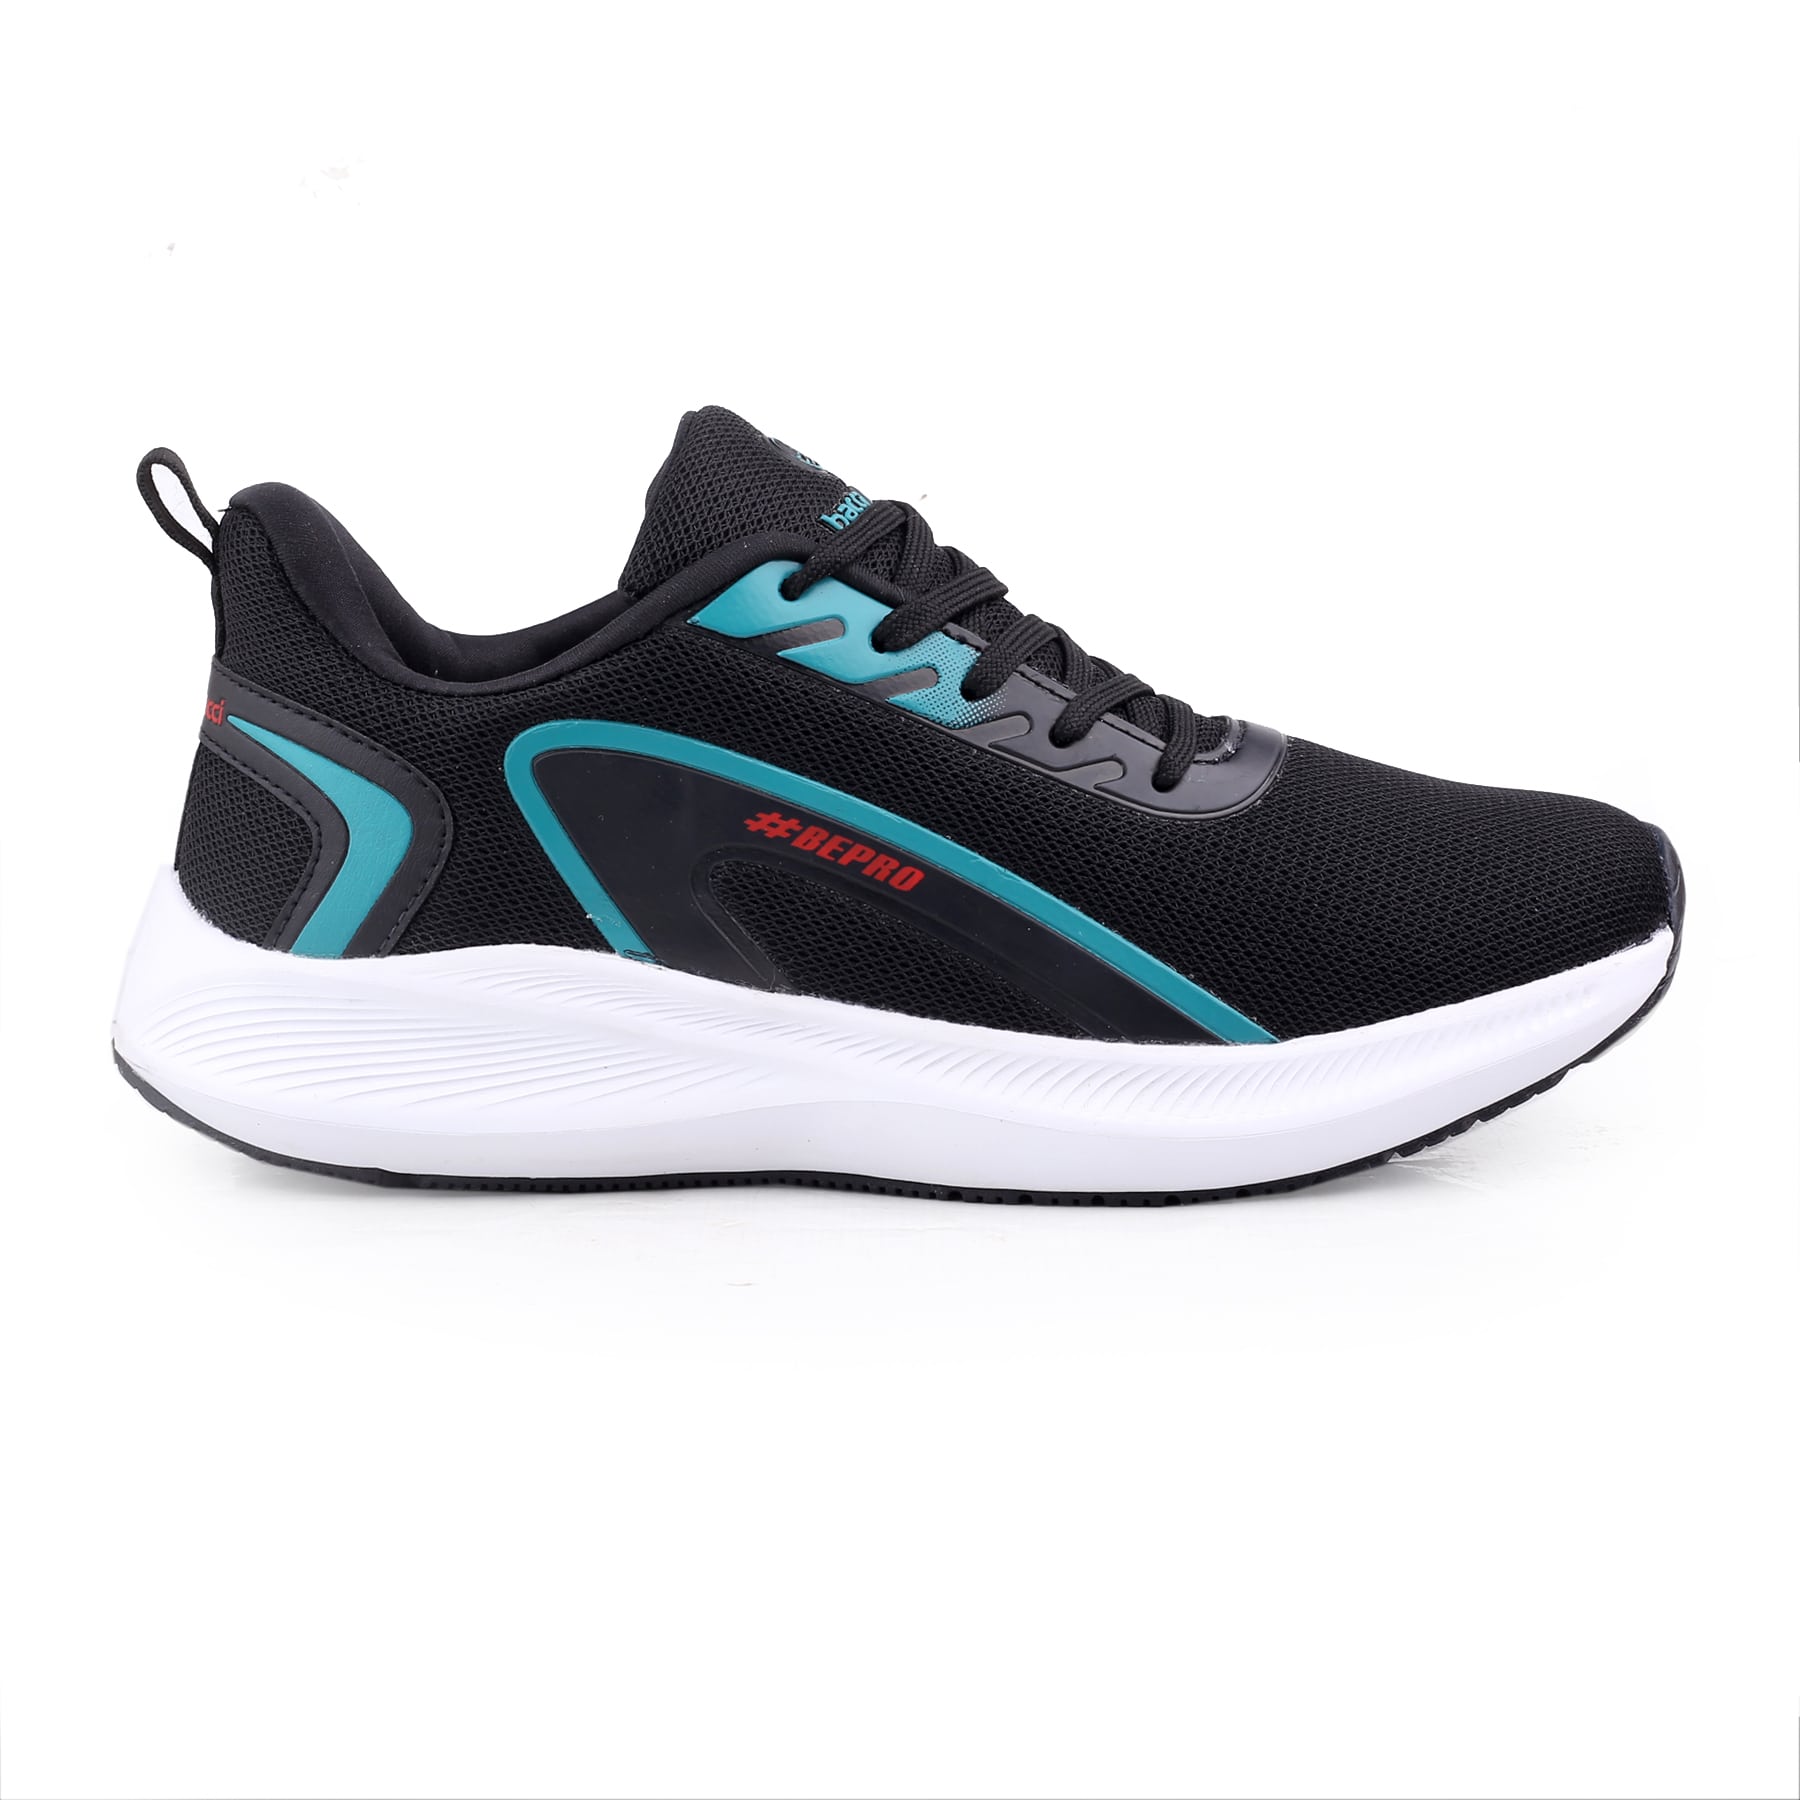 Bacca Bucci Essential All Purpose Walking Running Sports Shoes for Men